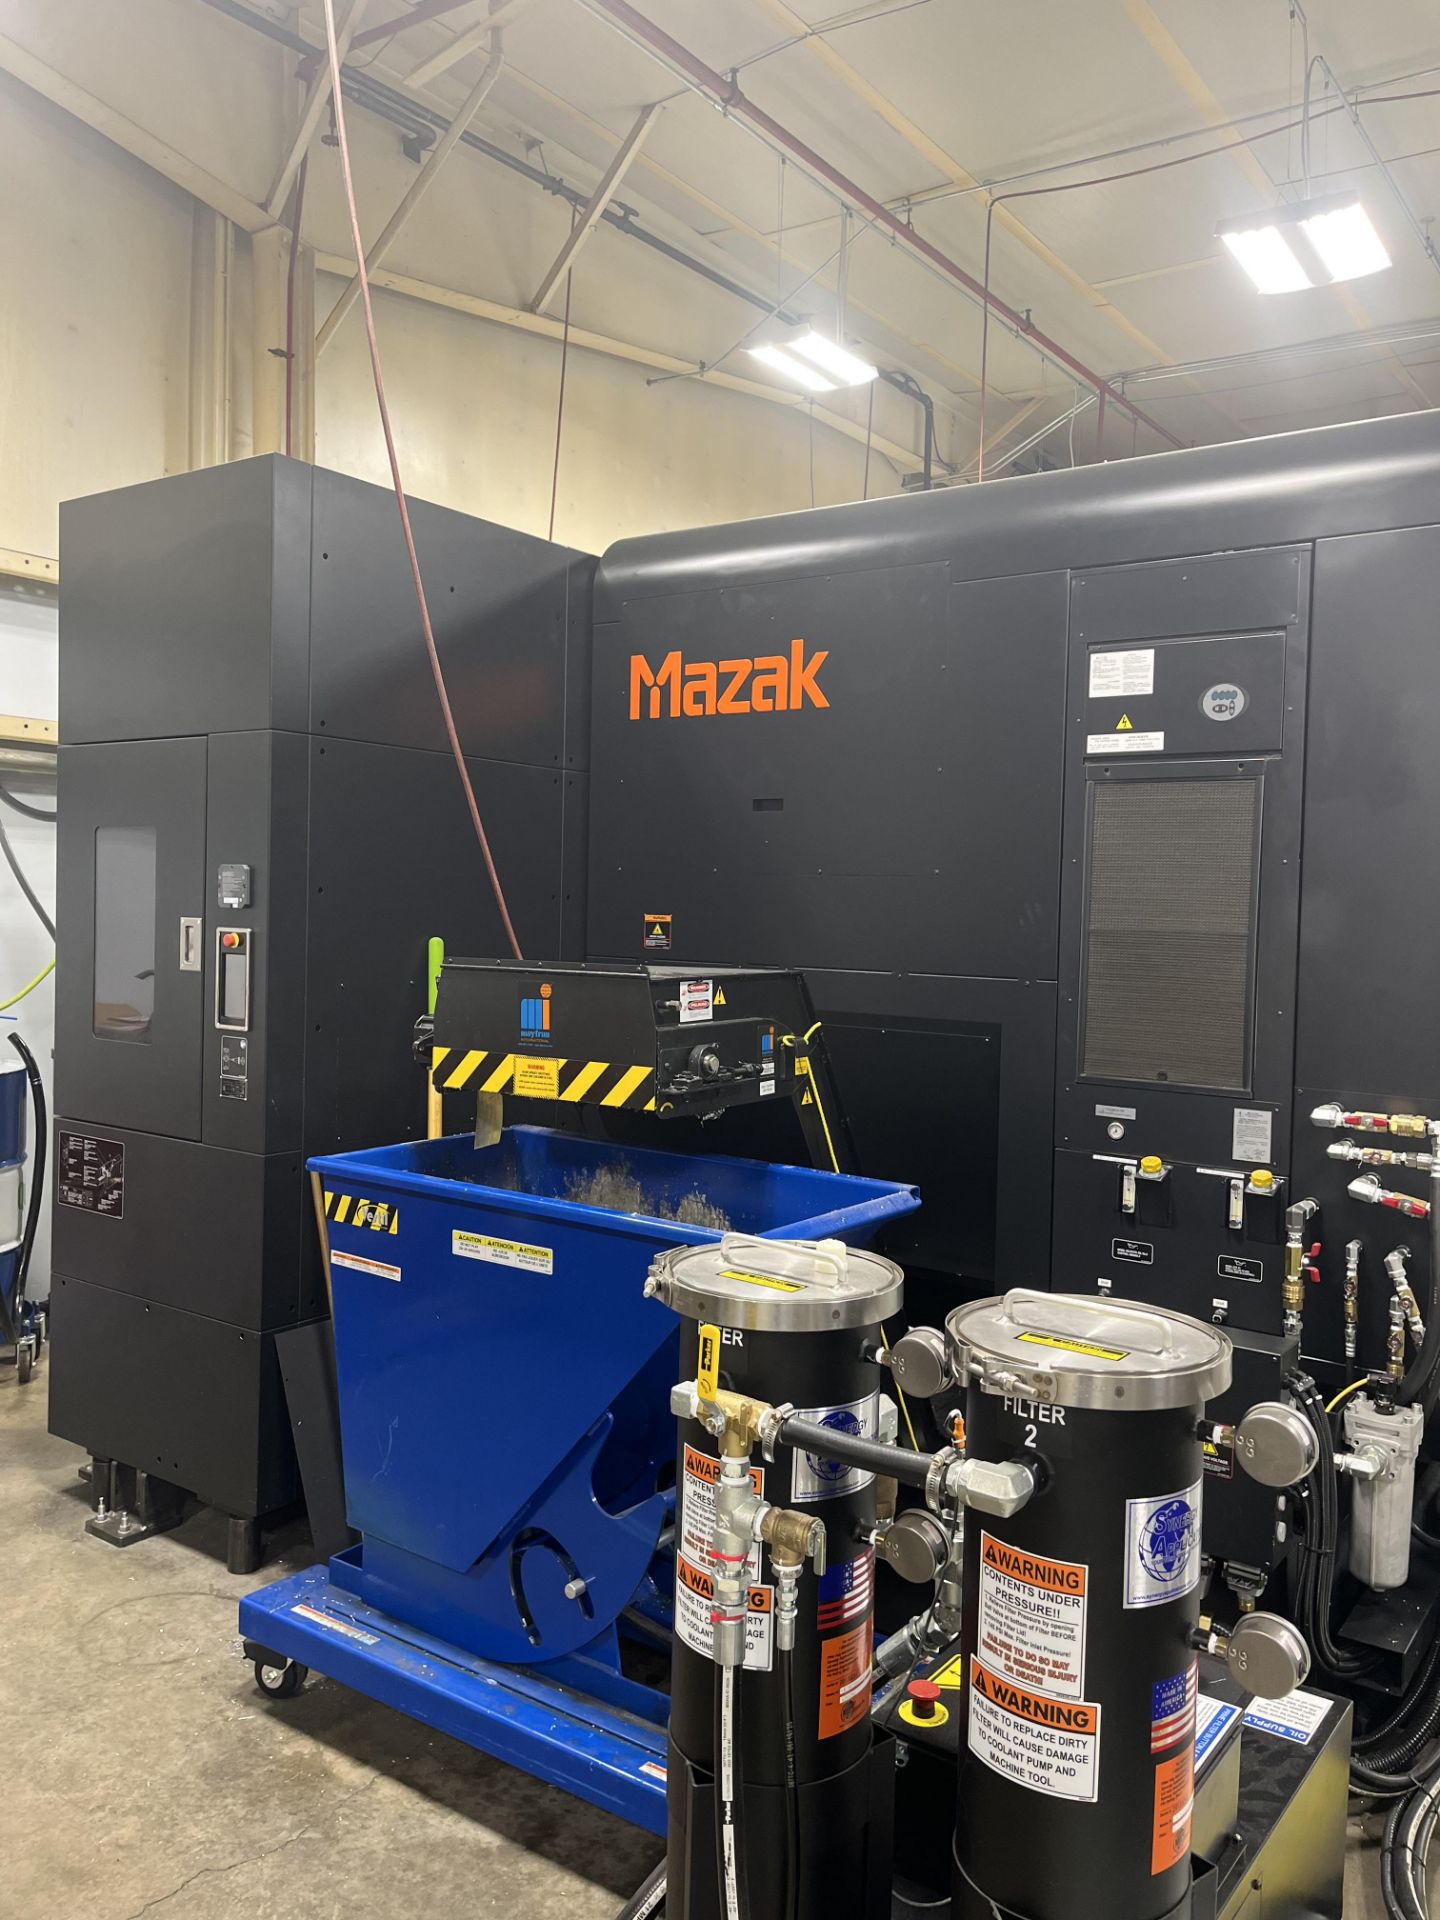 2019 MAZAK Variaxis I-700T 5-Axis CNC Vertical Machining Center with Mill Turn Option & 2 Pallets - Image 5 of 11